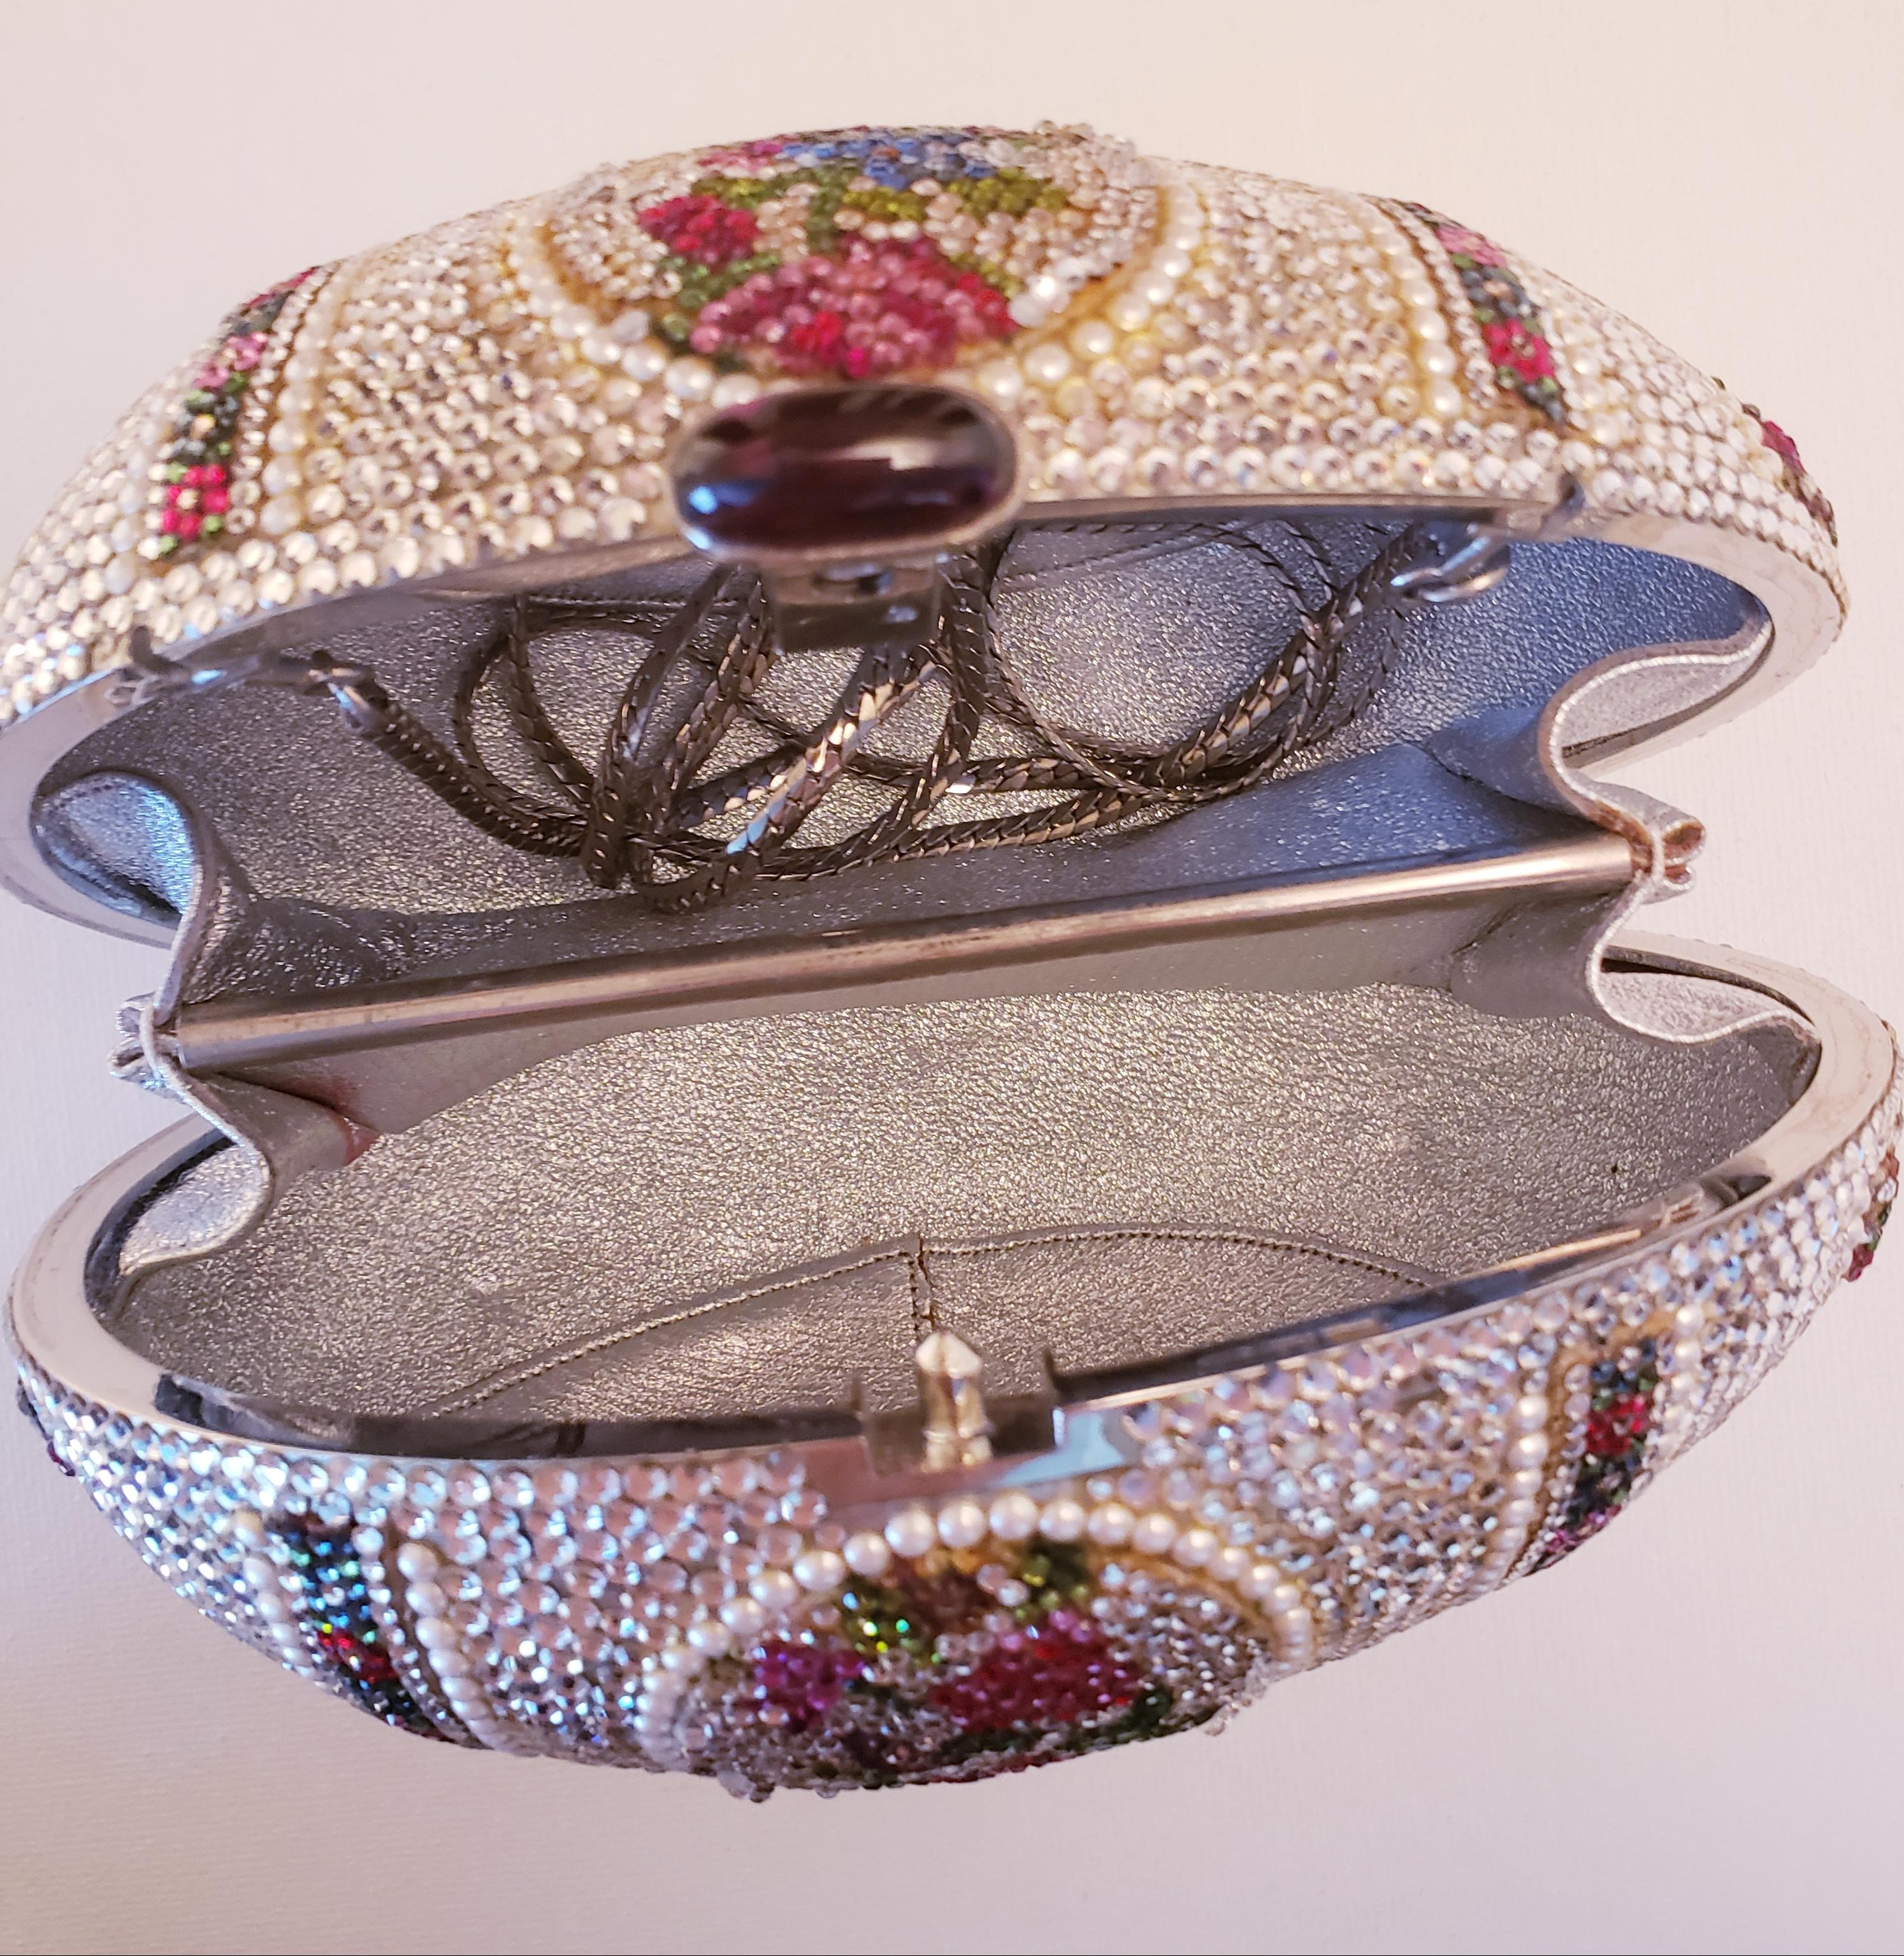 Judith Leiber egg minaudiere multicolor swarovski crystal design with delicate pearl details. Button closure opens to a silver leather interior with separate compartments and attached silver chain shoulder strap.  A true work of art. 
Measurements: